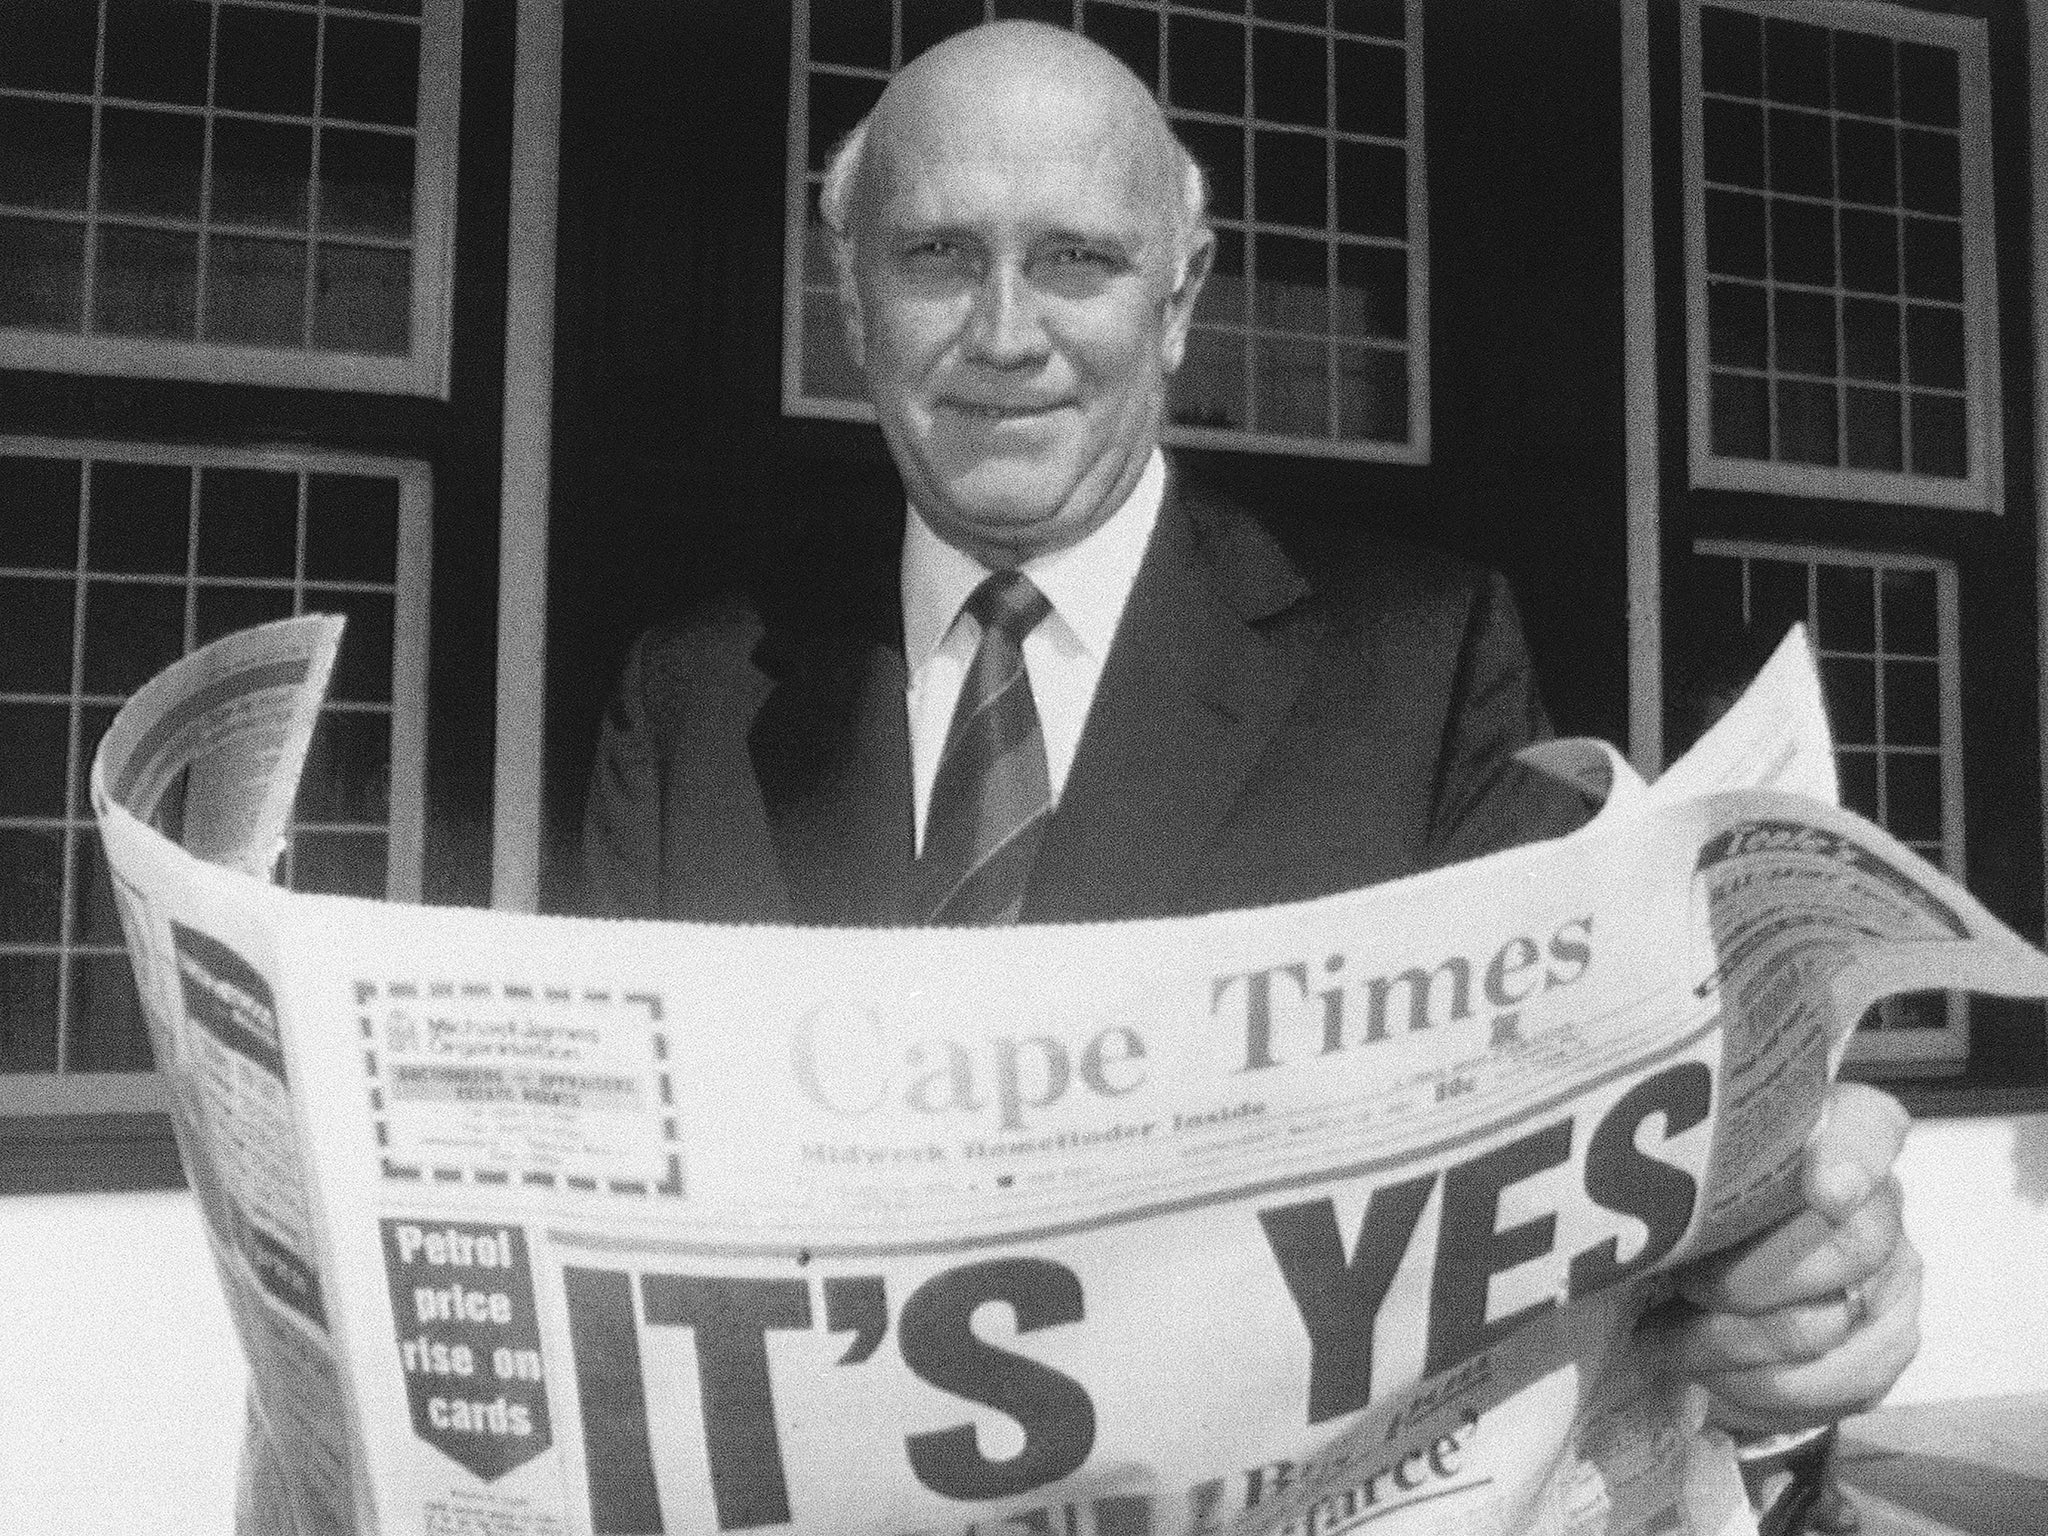 Former South African president, FW de Klerk, poses outside his office in Cape Town, South Africa in 1992